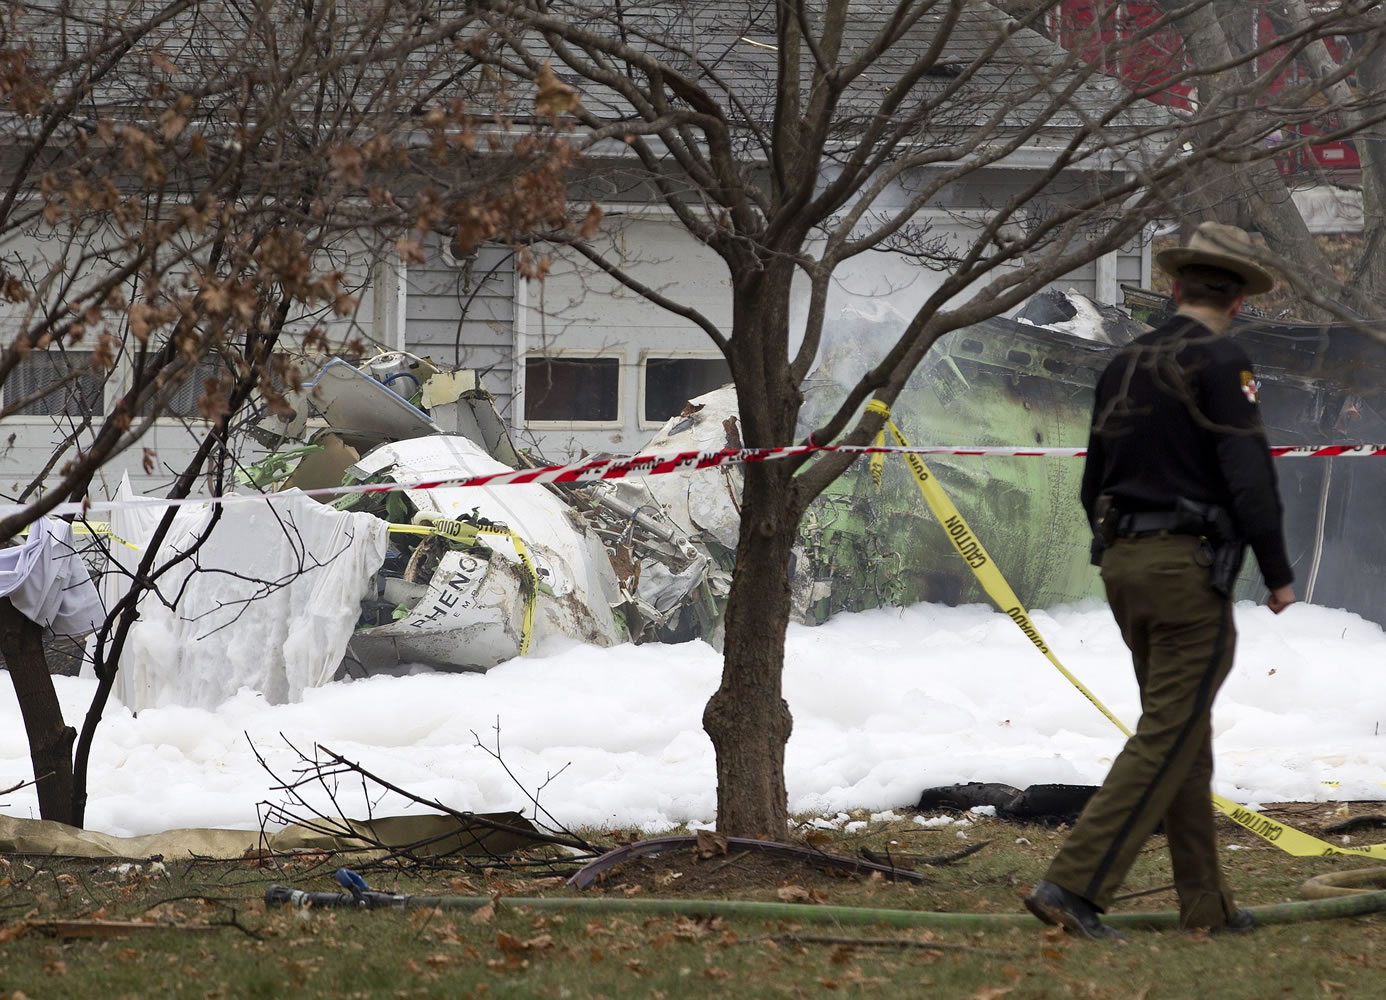 The wreckage of a small private jet smolders in a driveway Monday after crashing into a neighboring home in Gaithersburg, Md.